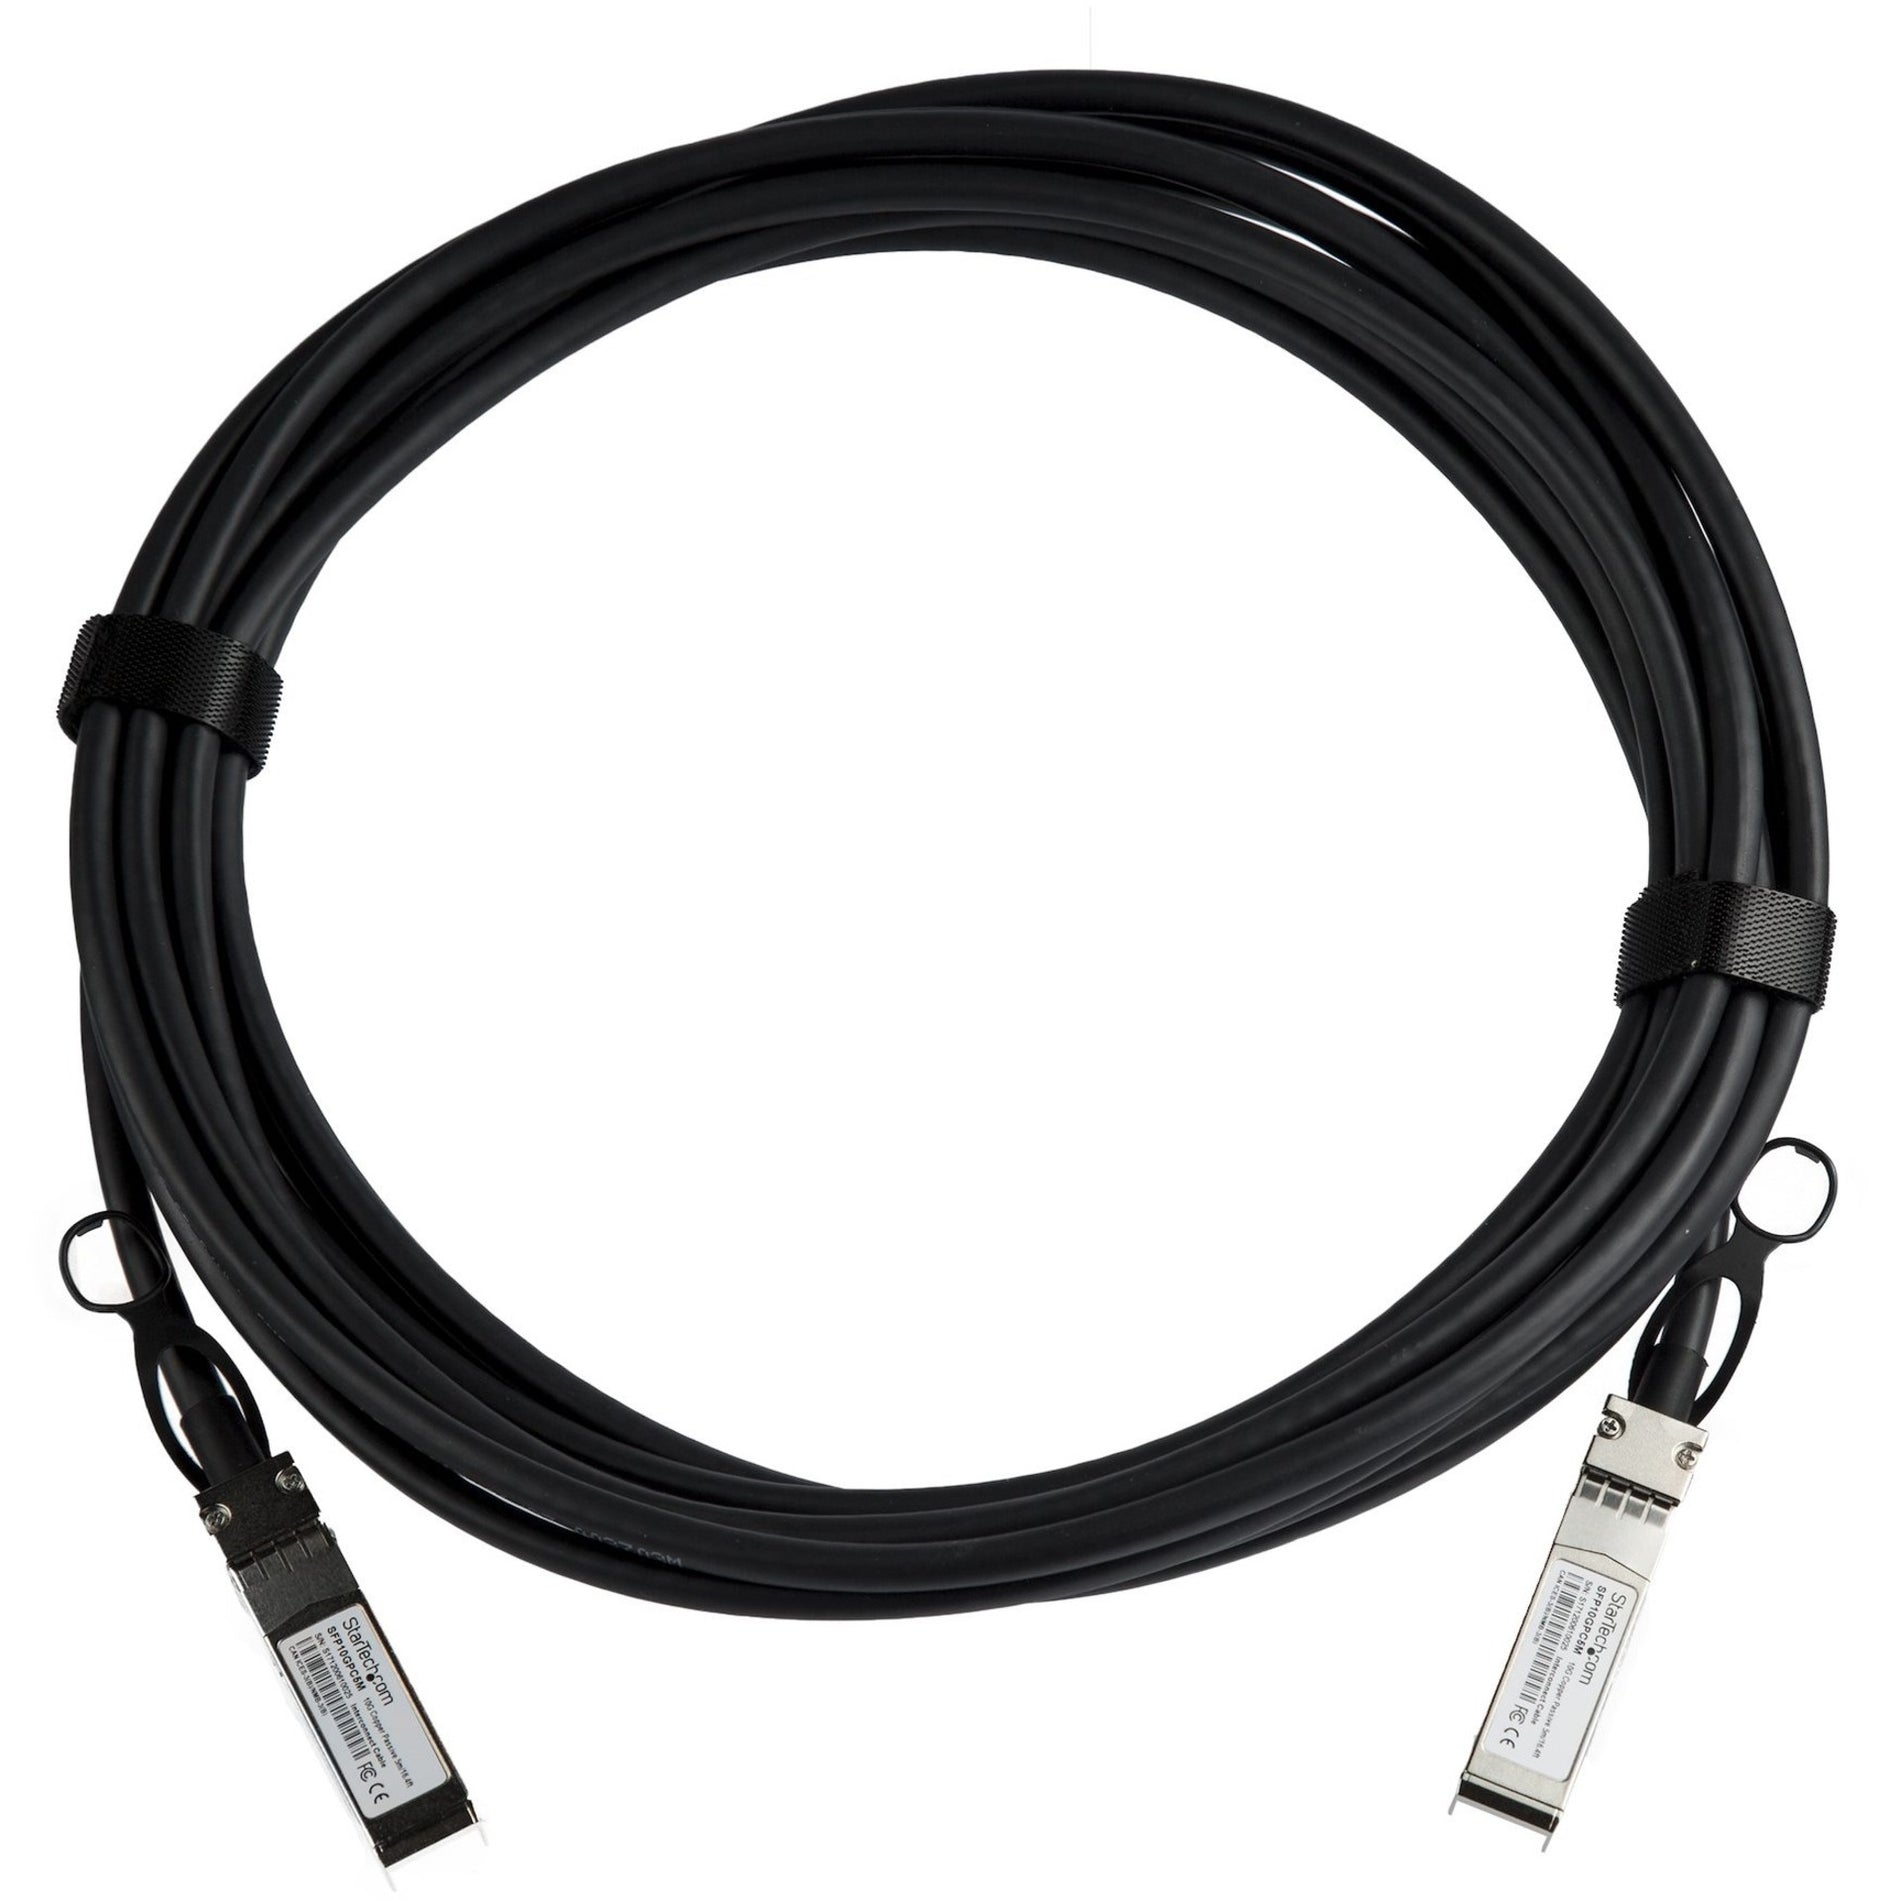 StarTech.com SFP10GPC5M SFP+ Direct Attach Cable - MSA Compliant - 5 m (16.4 ft.), Passive, Hot-swappable, 10 Gbit/s Data Transfer Rate, Twinaxial Network Cable